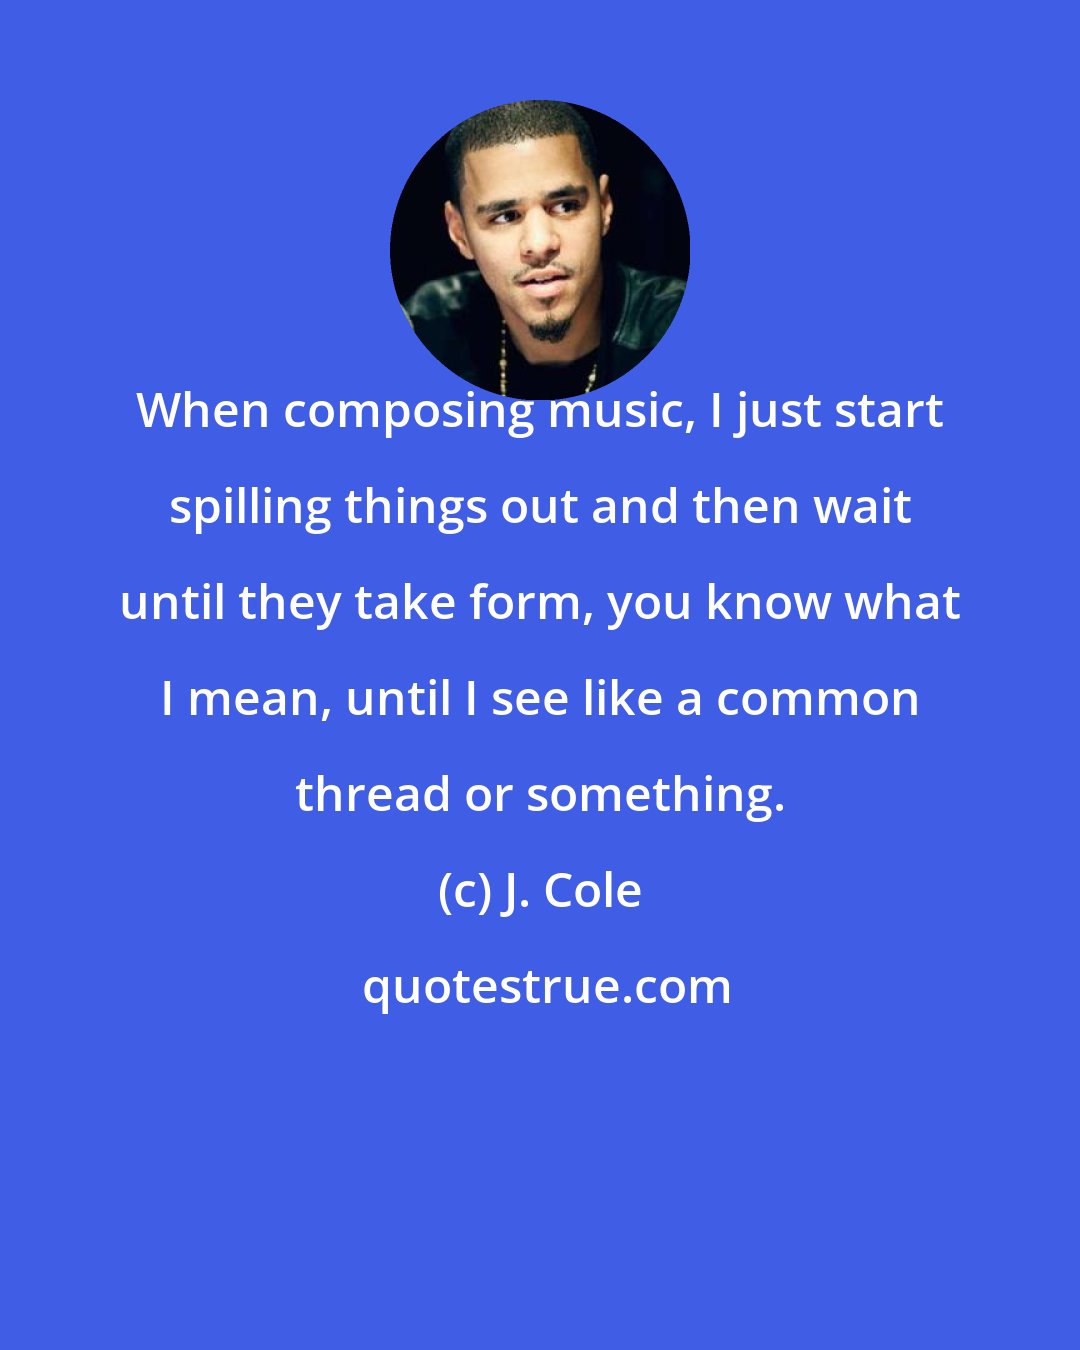 J. Cole: When composing music, I just start spilling things out and then wait until they take form, you know what I mean, until I see like a common thread or something.